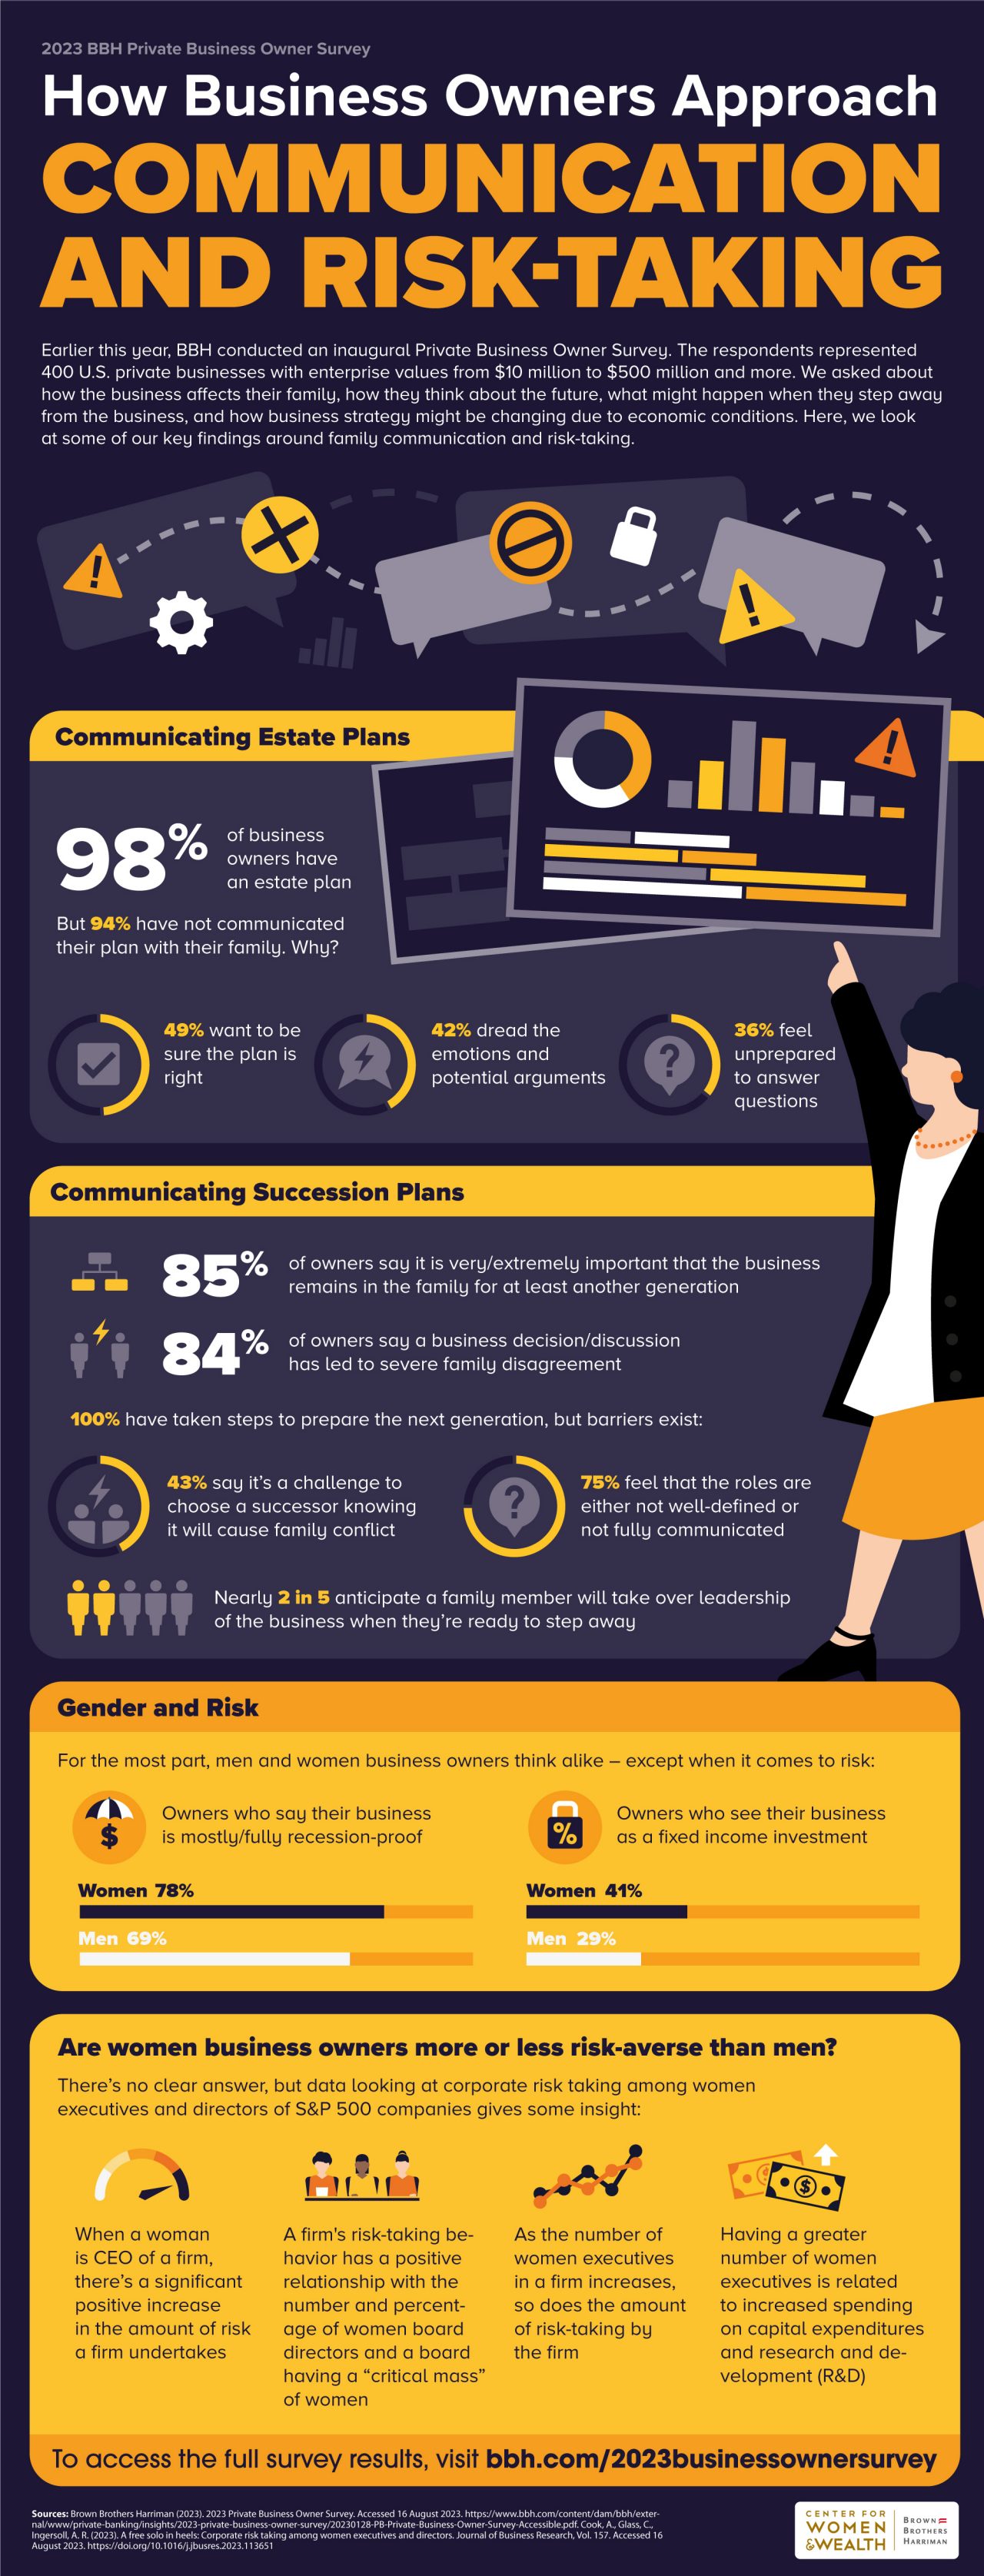 Defining the Decade - Infographic describing progress of women in business over the past decade.